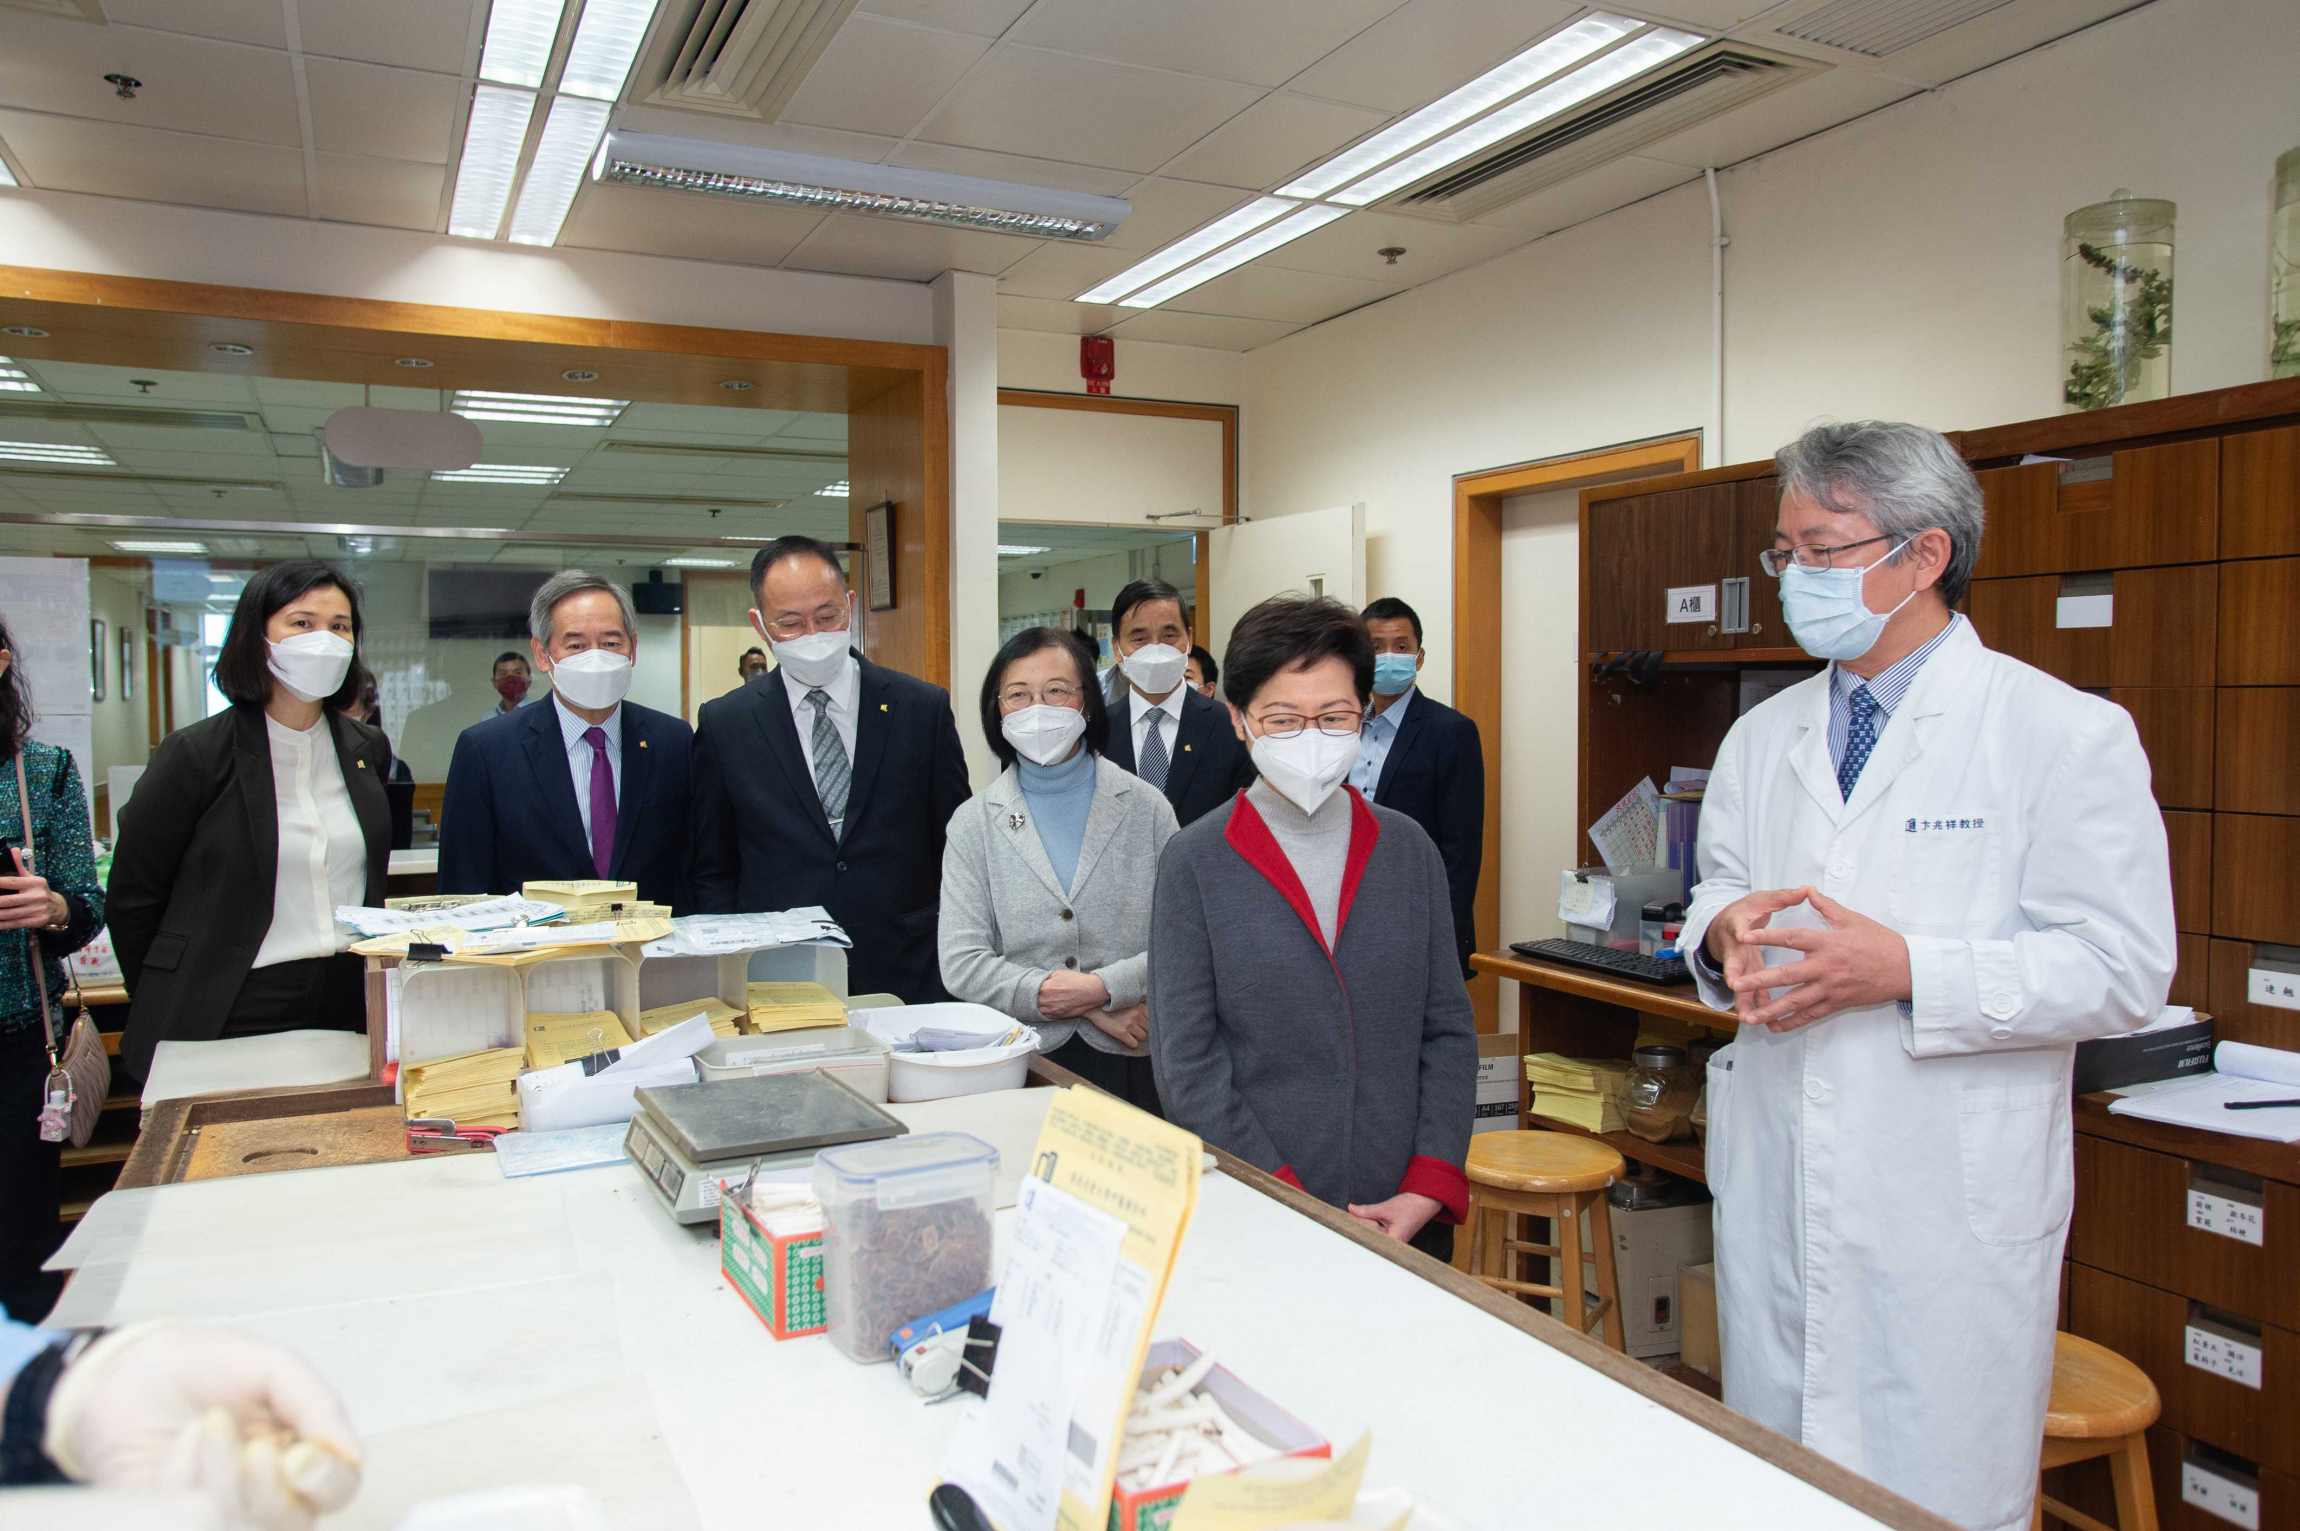 Professor Bian Zhaoxiang, Associate Vice-President (Chinese Medicine Development) of HKBU (1st right), introduces the medicine dispensing service offered by the School of Chinese Medicine for COVID-19 patients.